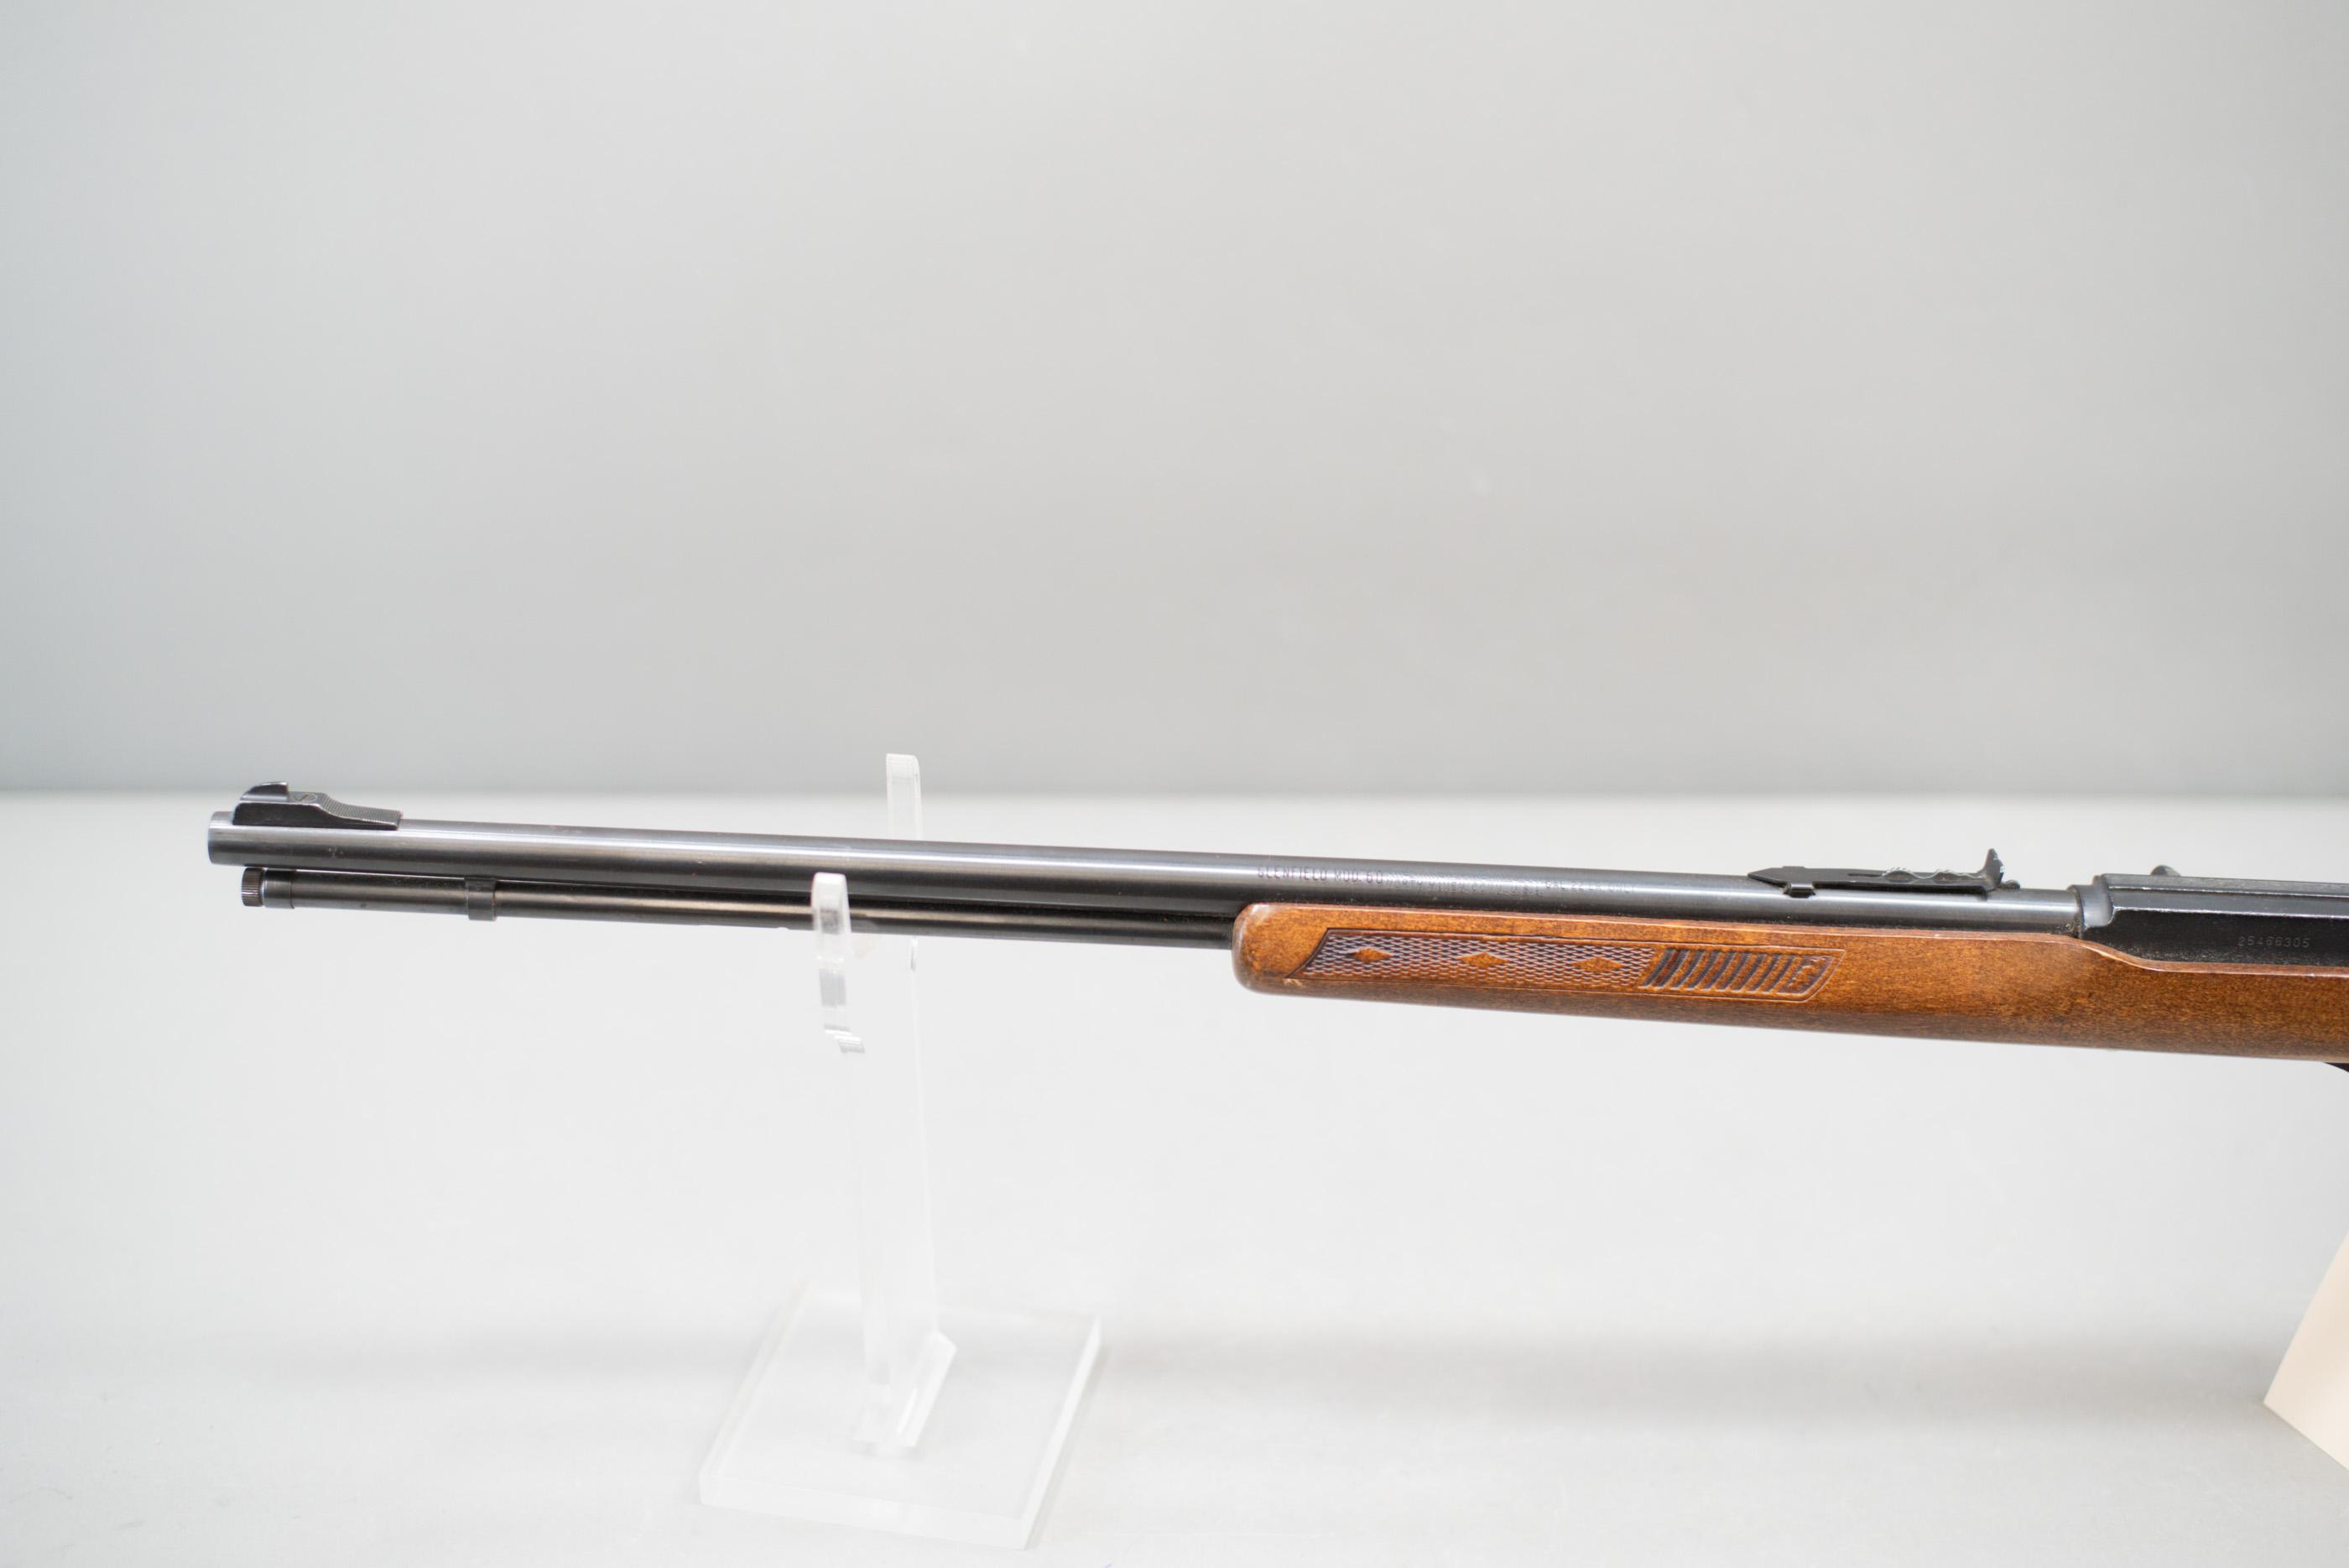 (R) Glenfield Model 60 .22LR Only Rifle